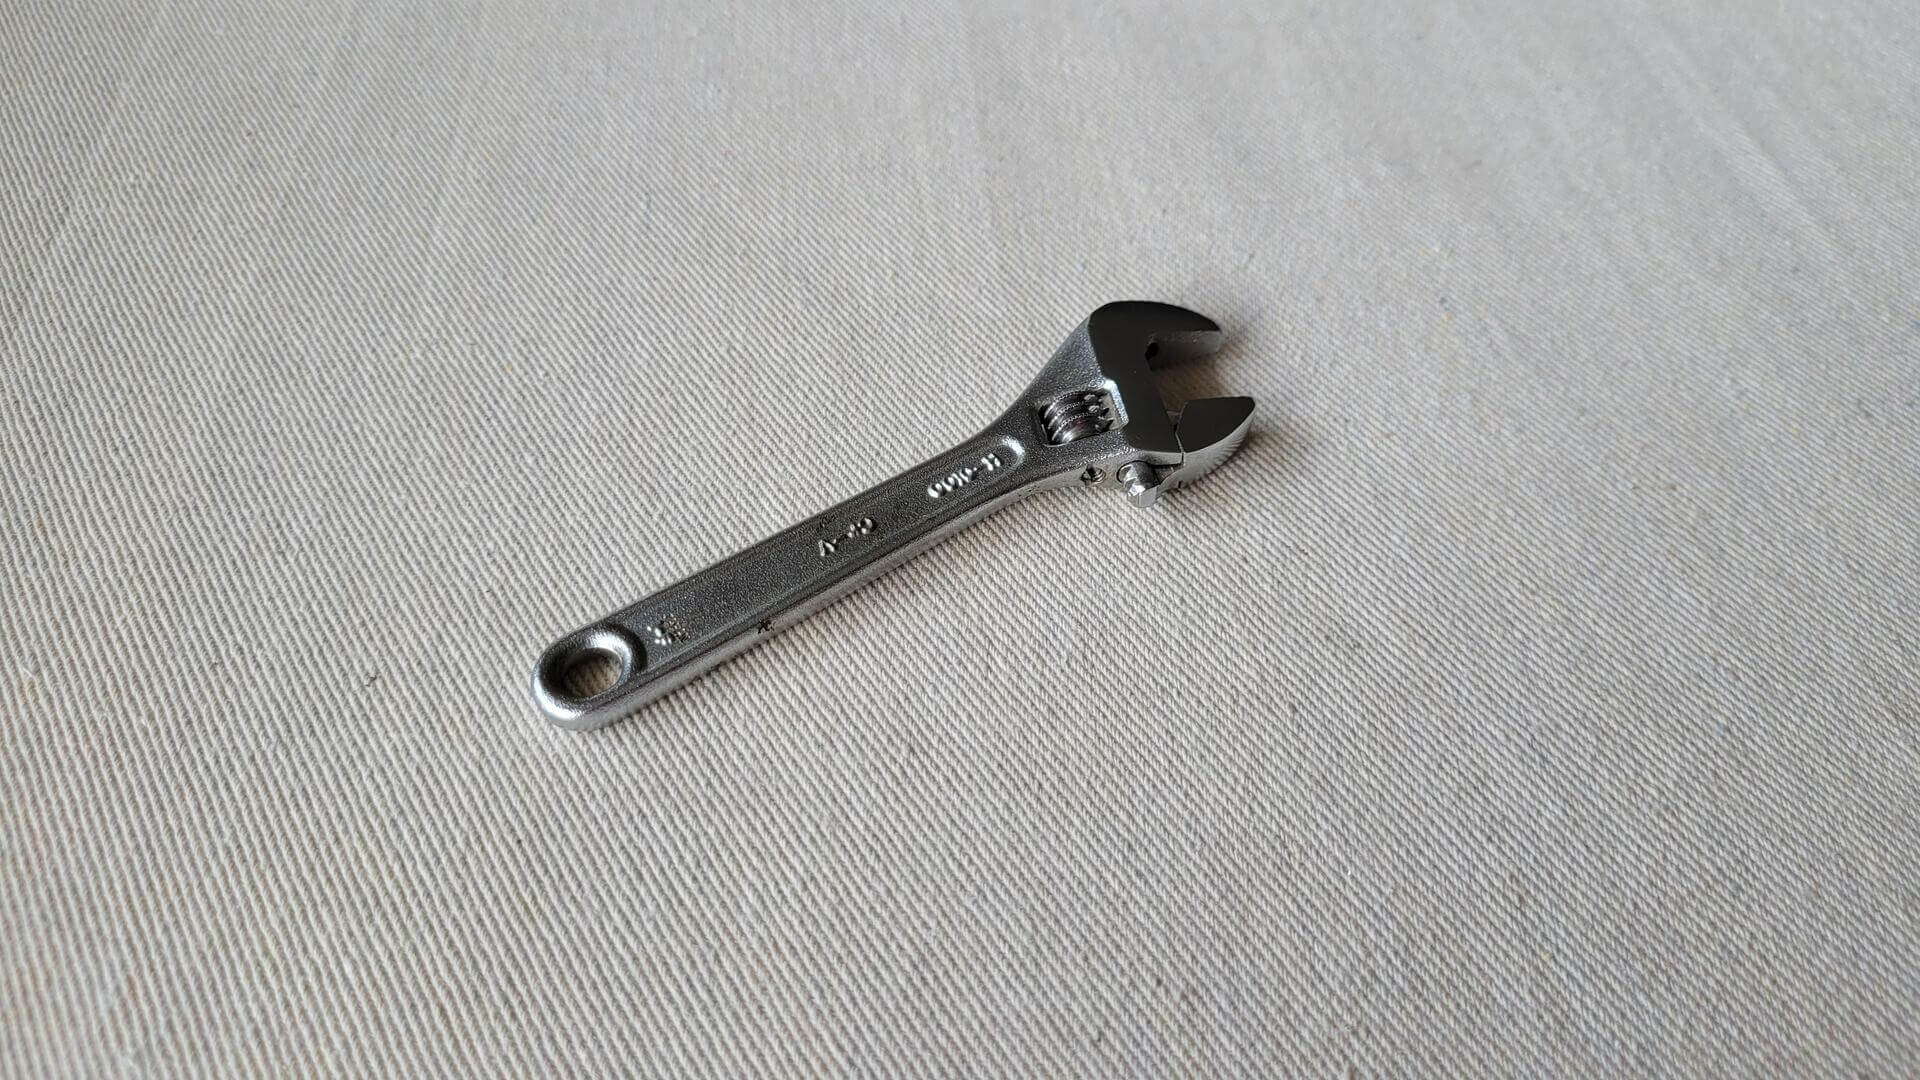 Heavy Duty model H-0100 adjustable wrench by Top 100mm / 4" long. Fine vintage made in Japan collectible pliers, shifting spanners & automotive hand tools